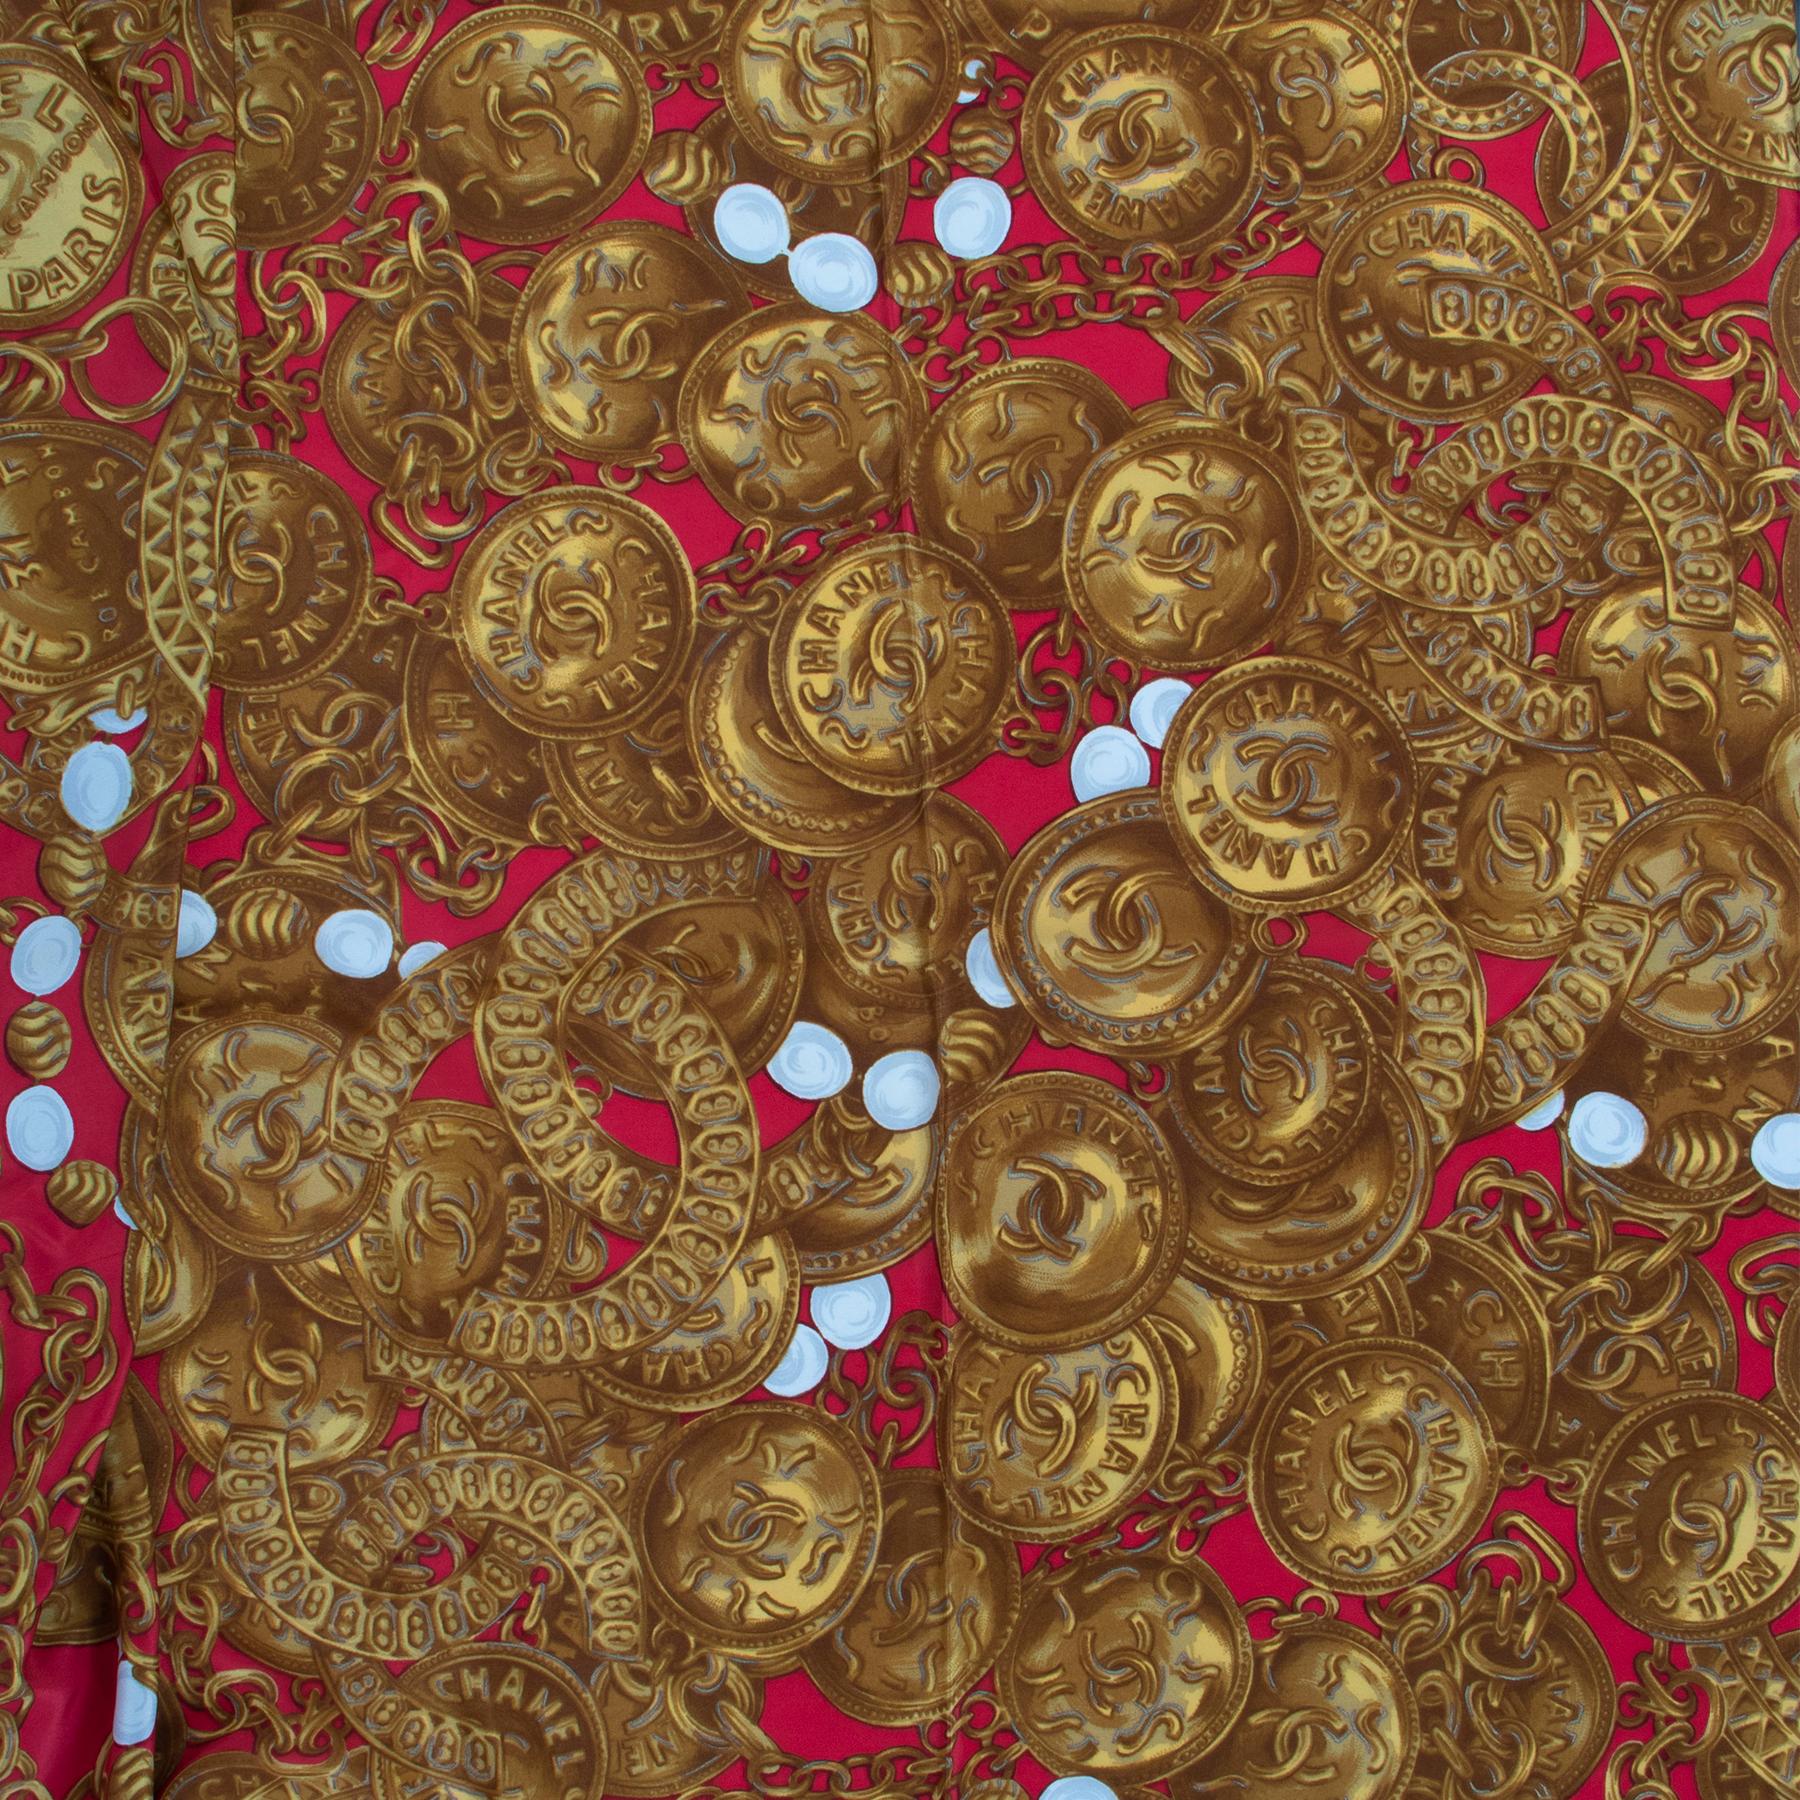 Chanel Vintage Gold Medallion Red XL Silk Scarf

A scarf just big enough to not only give you an elegant look but also keep you warm on a fall day.
This Chanel 31 Rue Cambon Paris scarf is made of 100% silk and beautifully finished with gold chains,